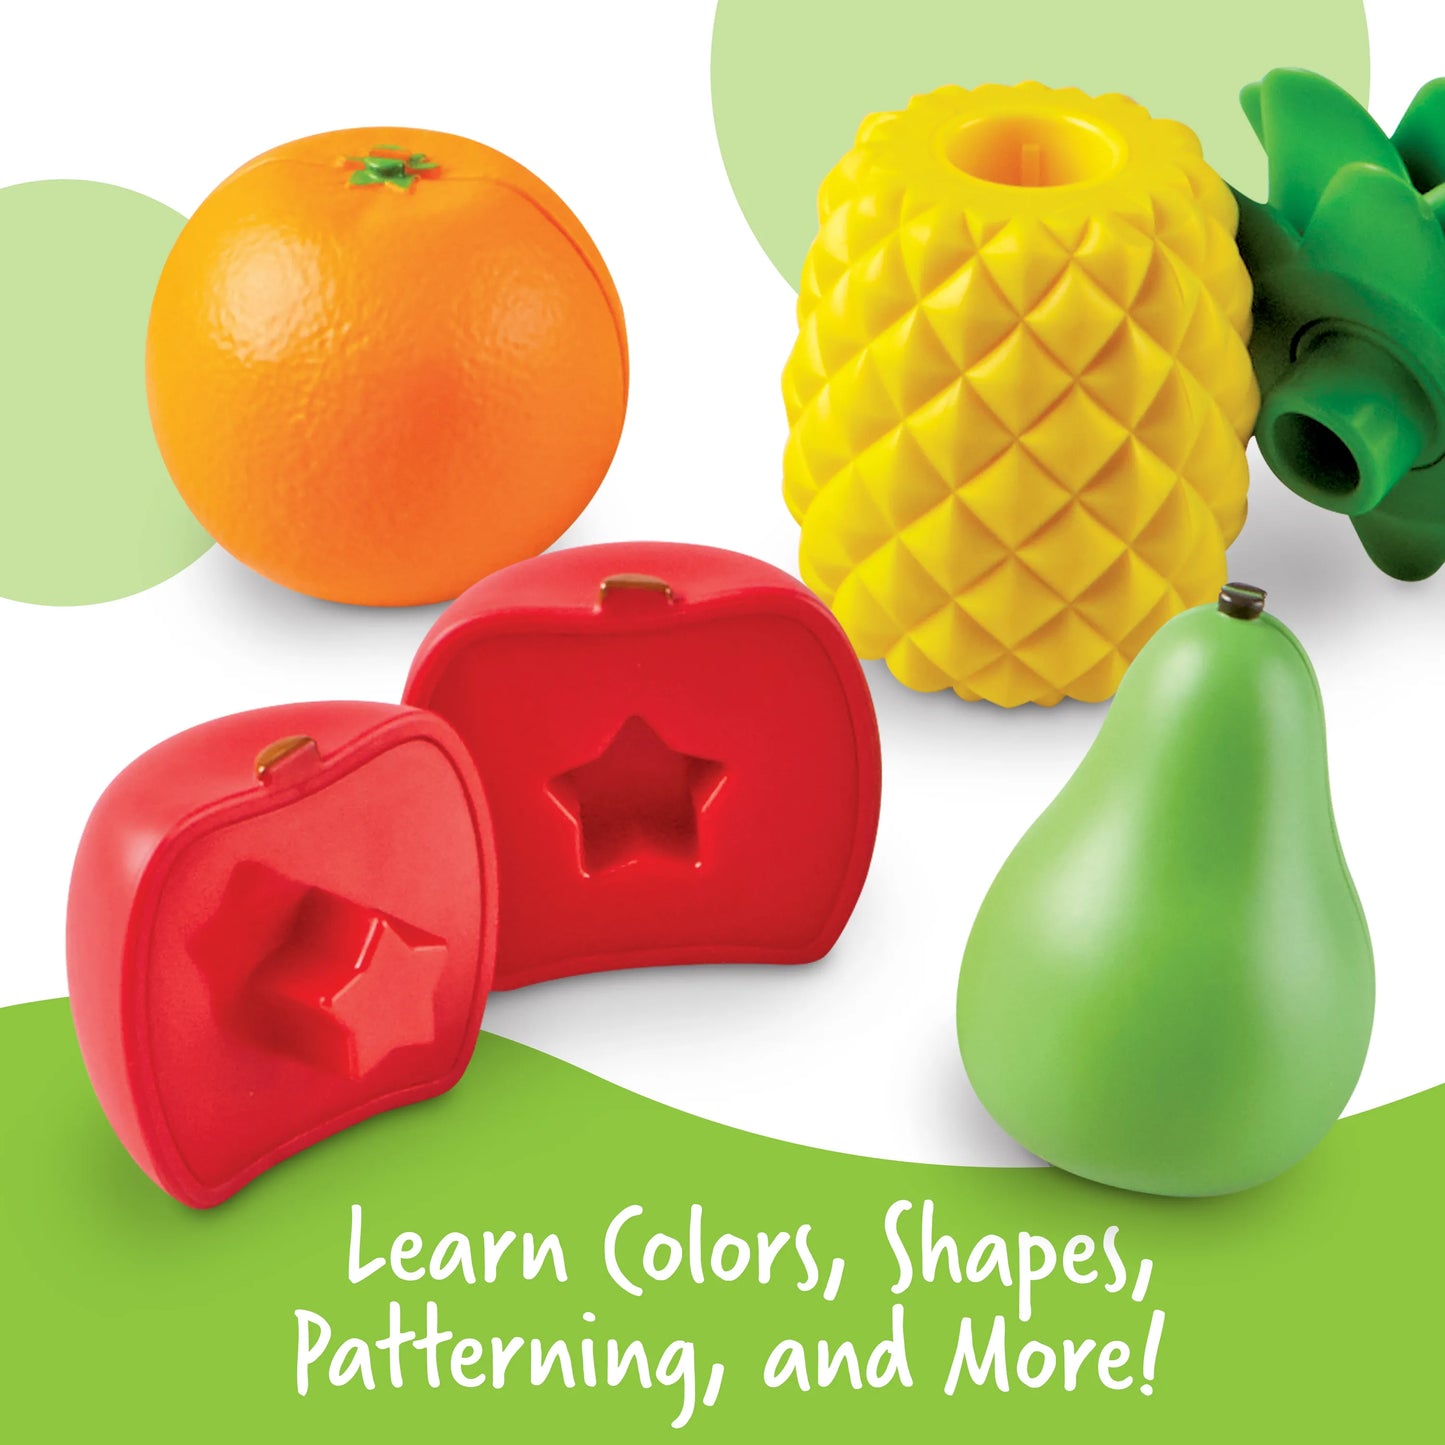 Learning Resources Snap-n-Learn Fruit Shapers